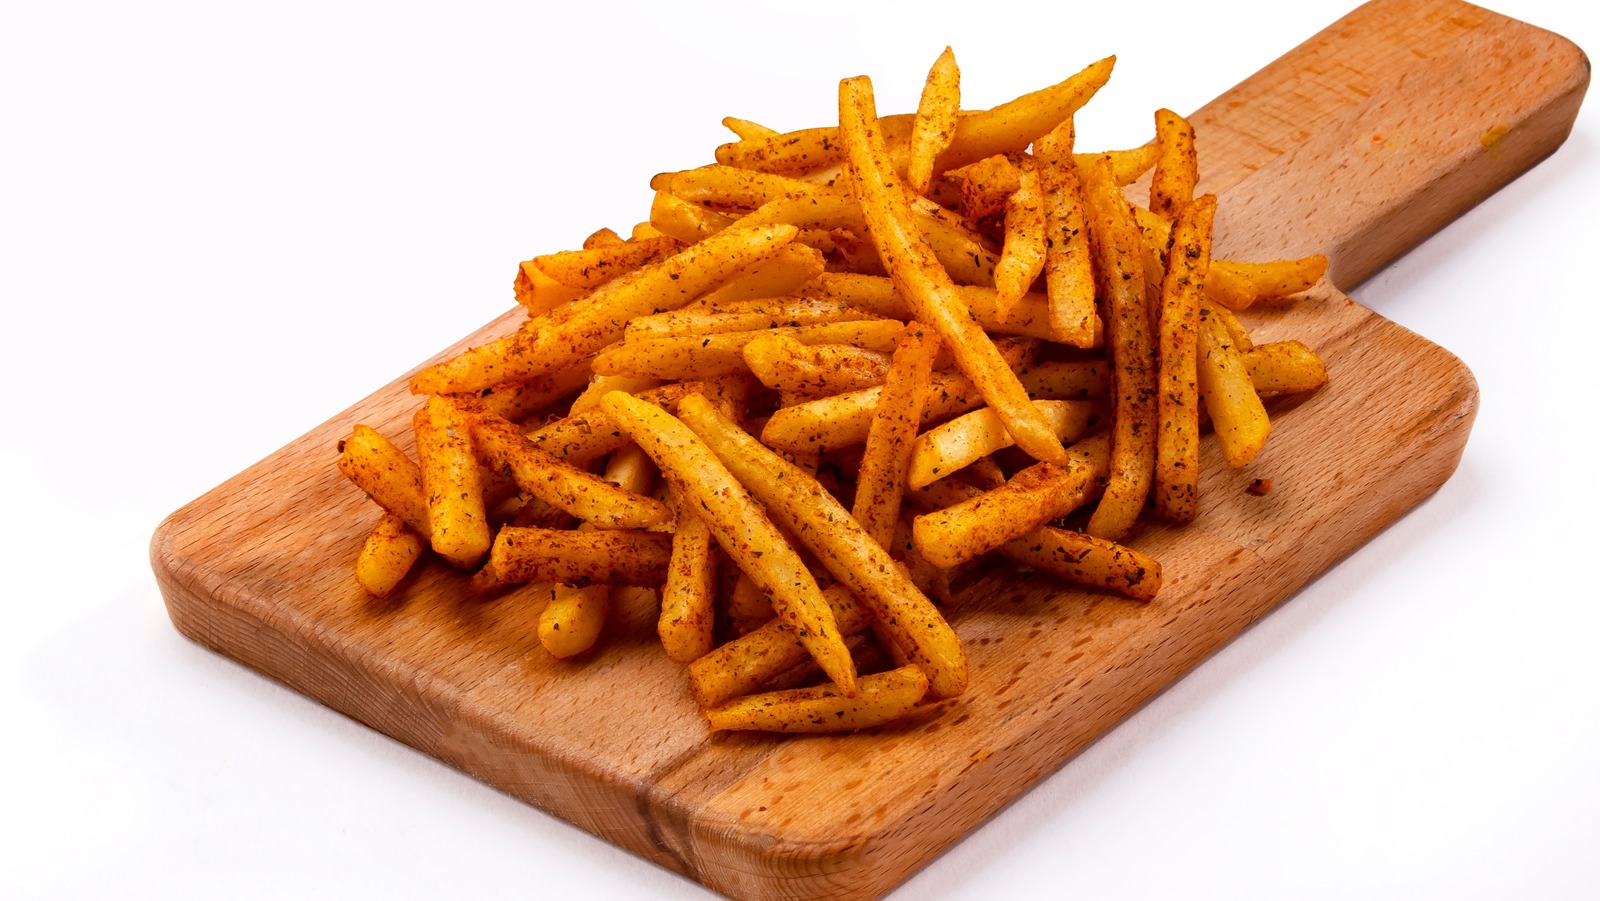 https://www.thedailymeal.com/img/gallery/your-french-fry-game-will-never-be-the-same-with-one-unexpected-seasoning-powder/l-intro-1681926392.jpg